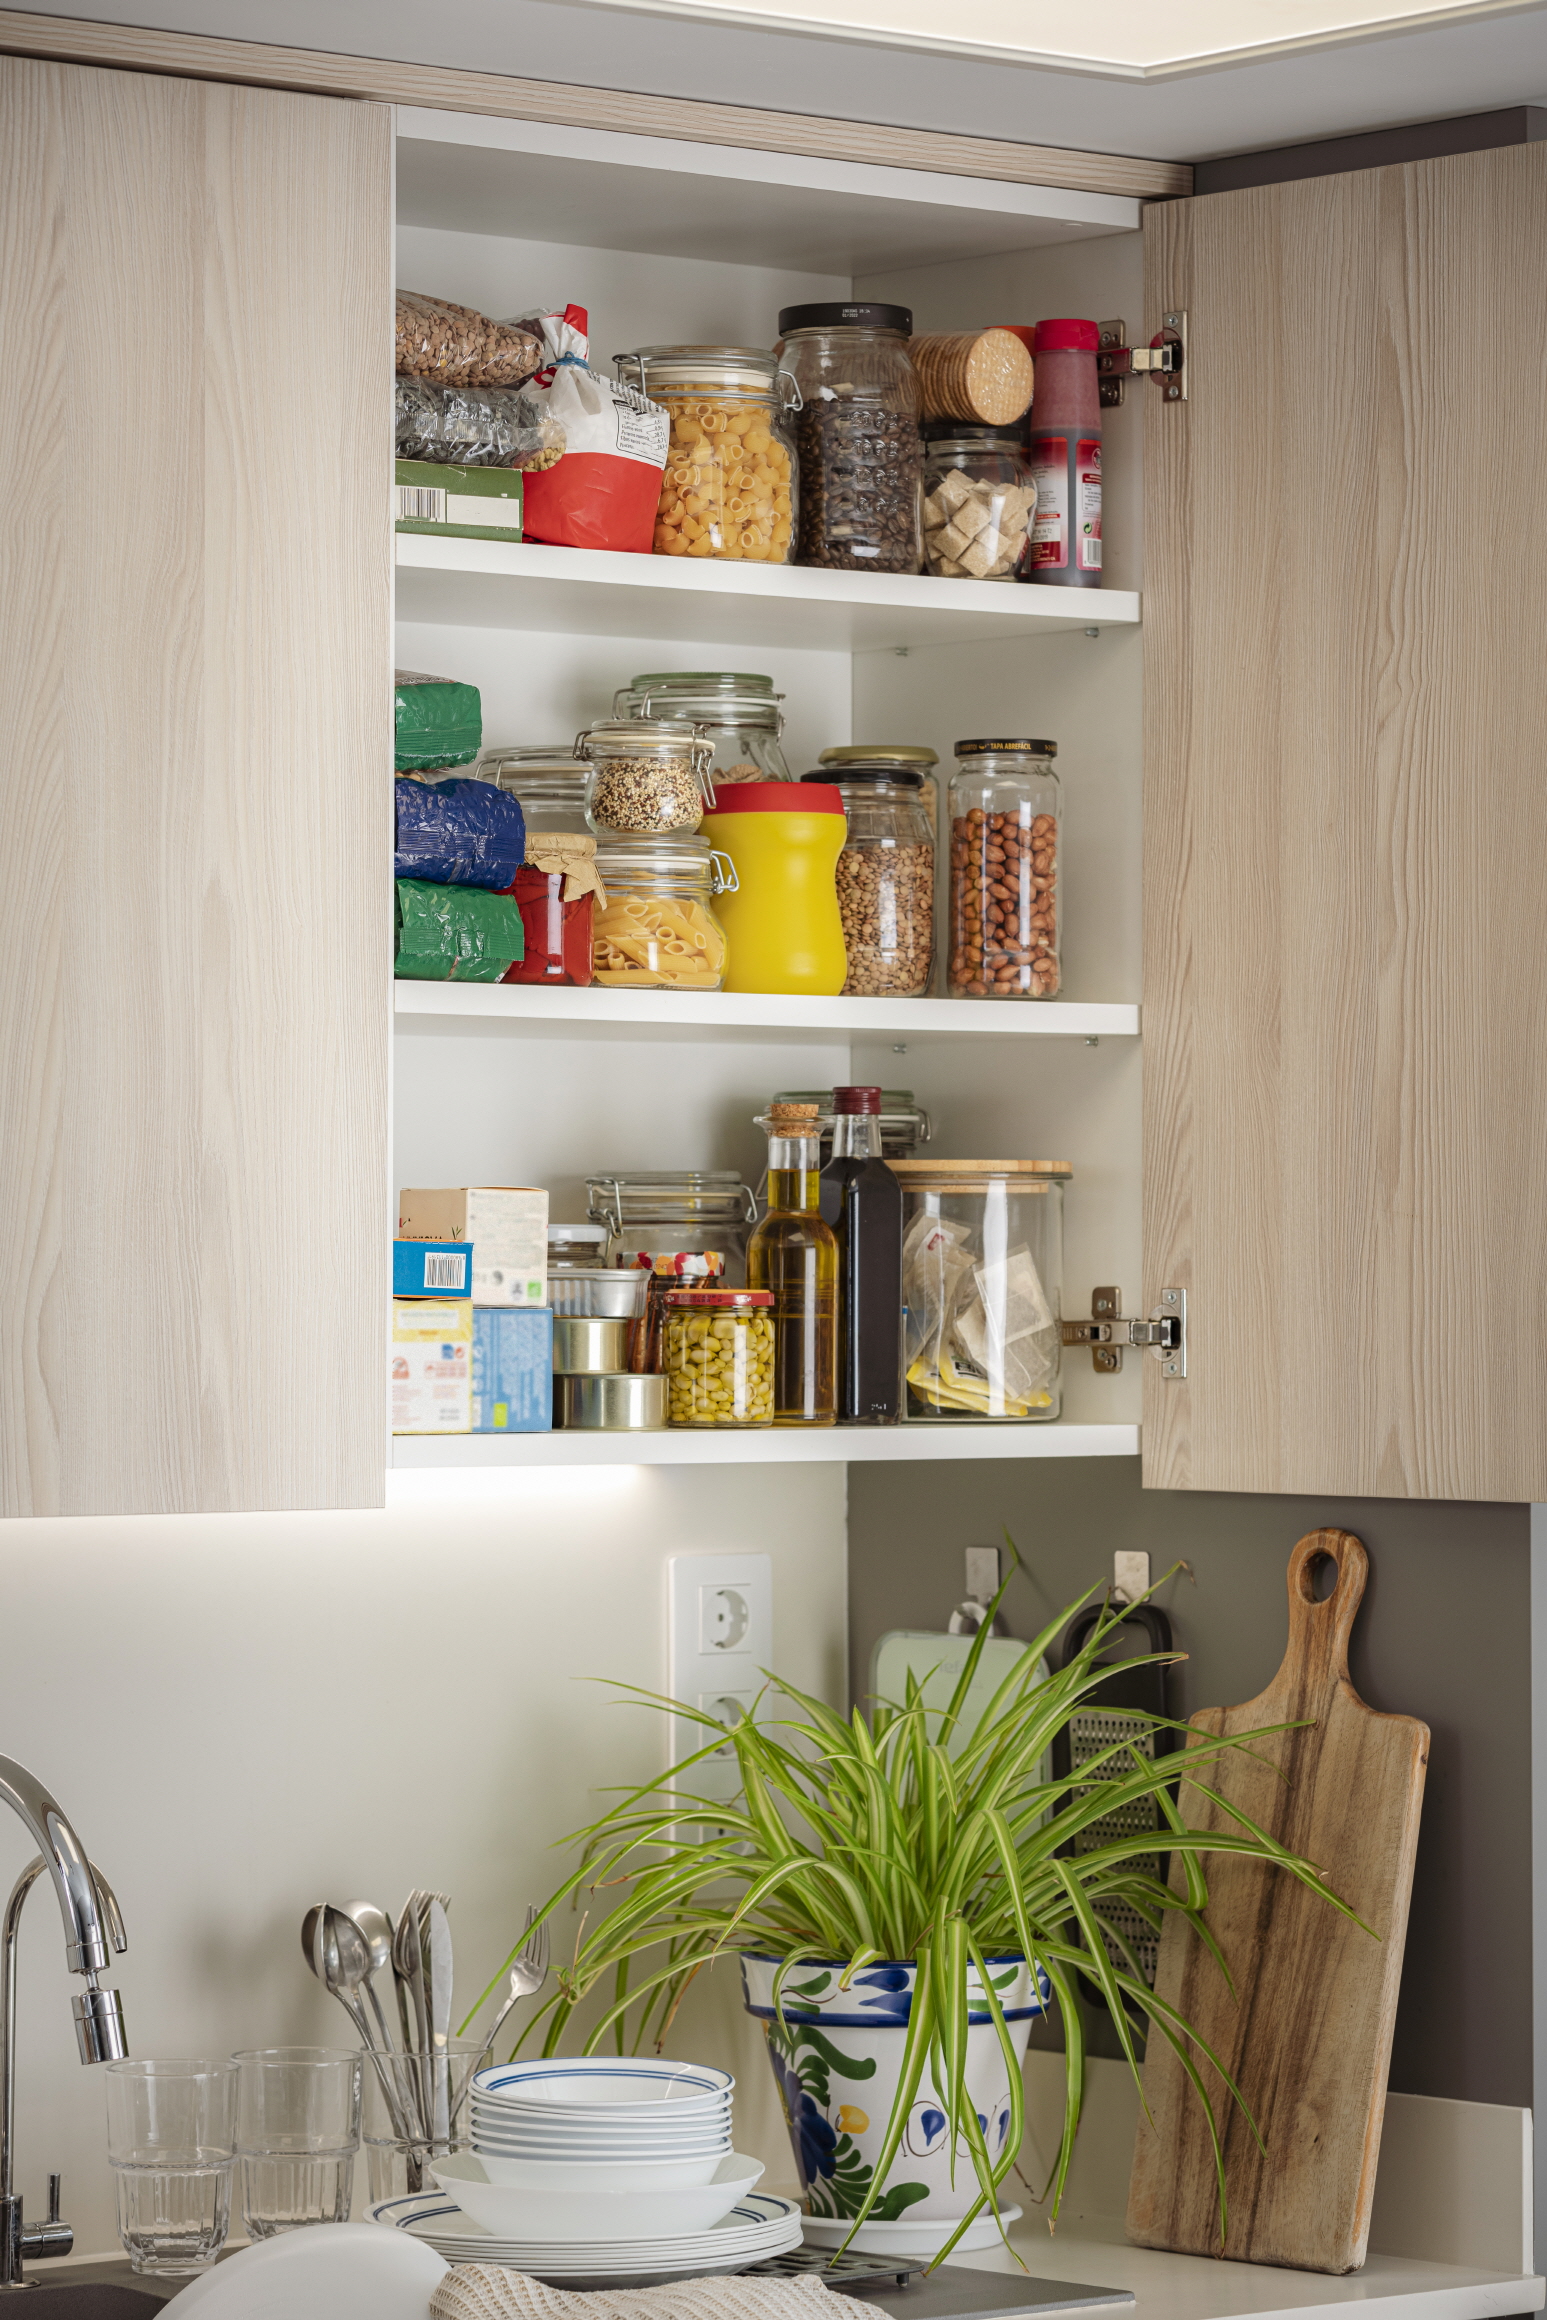 Small kitchen remodels need efficient pantry design for space-saving solutions.